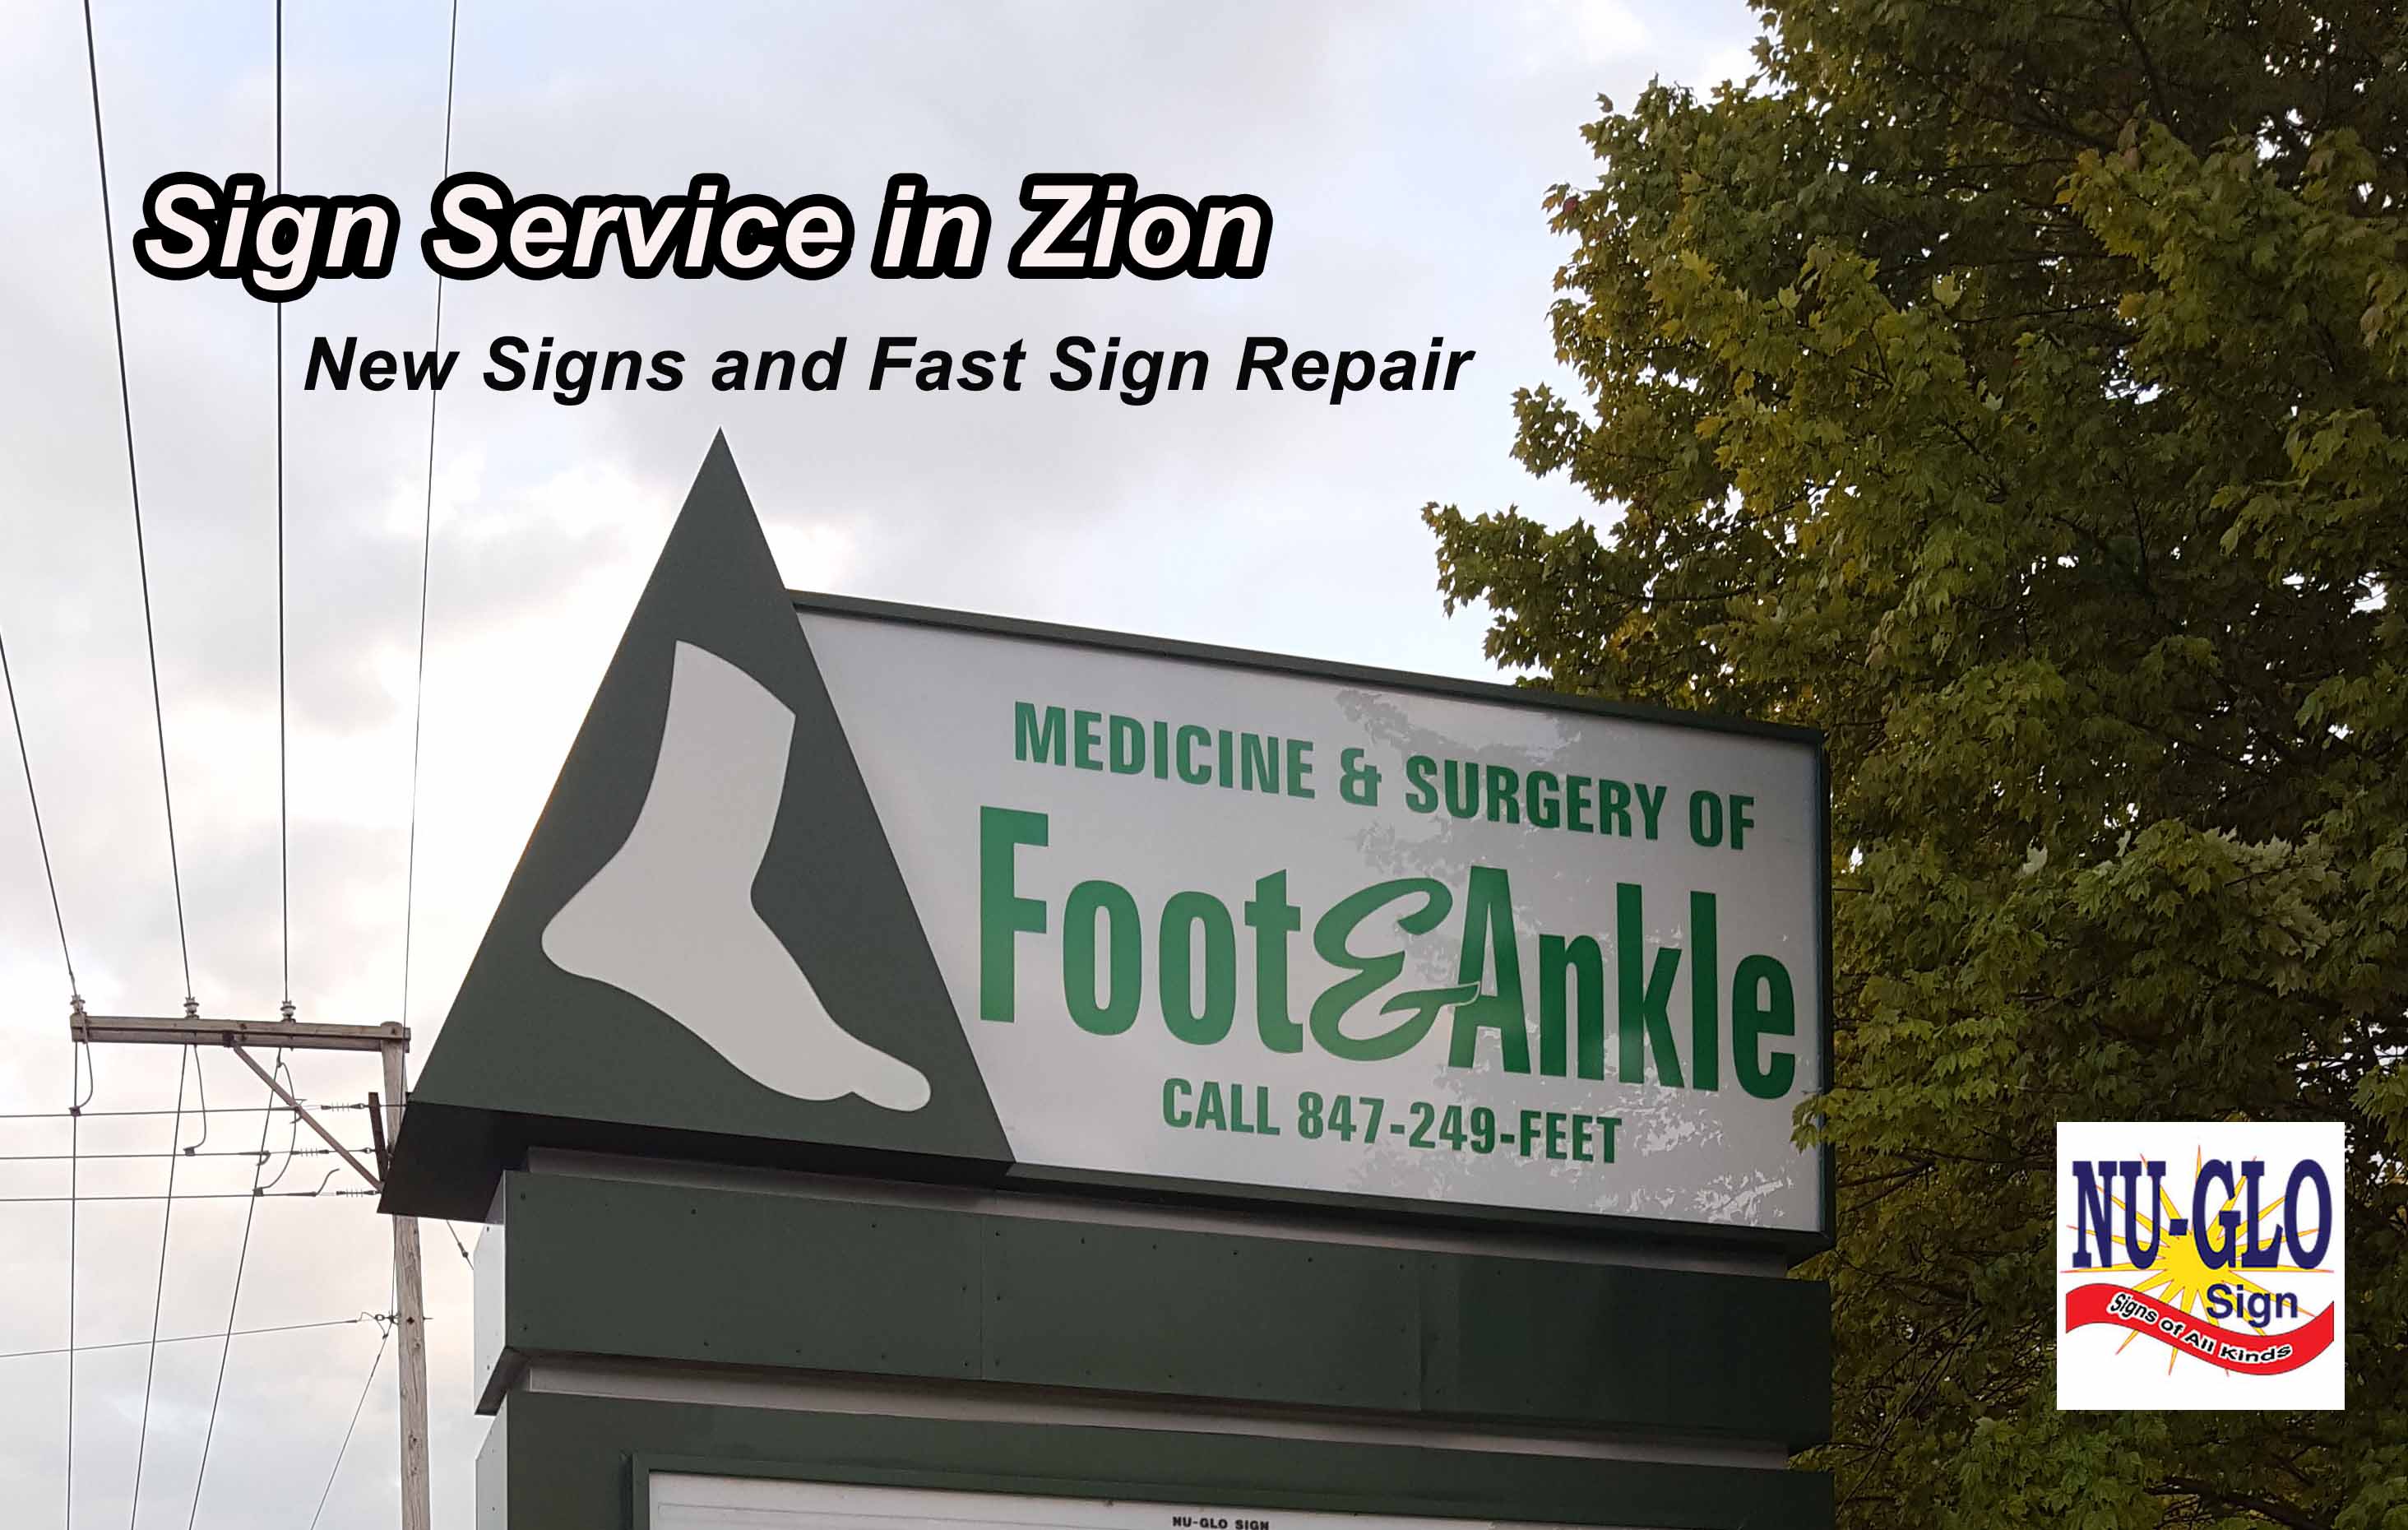 Sign Service in Zion